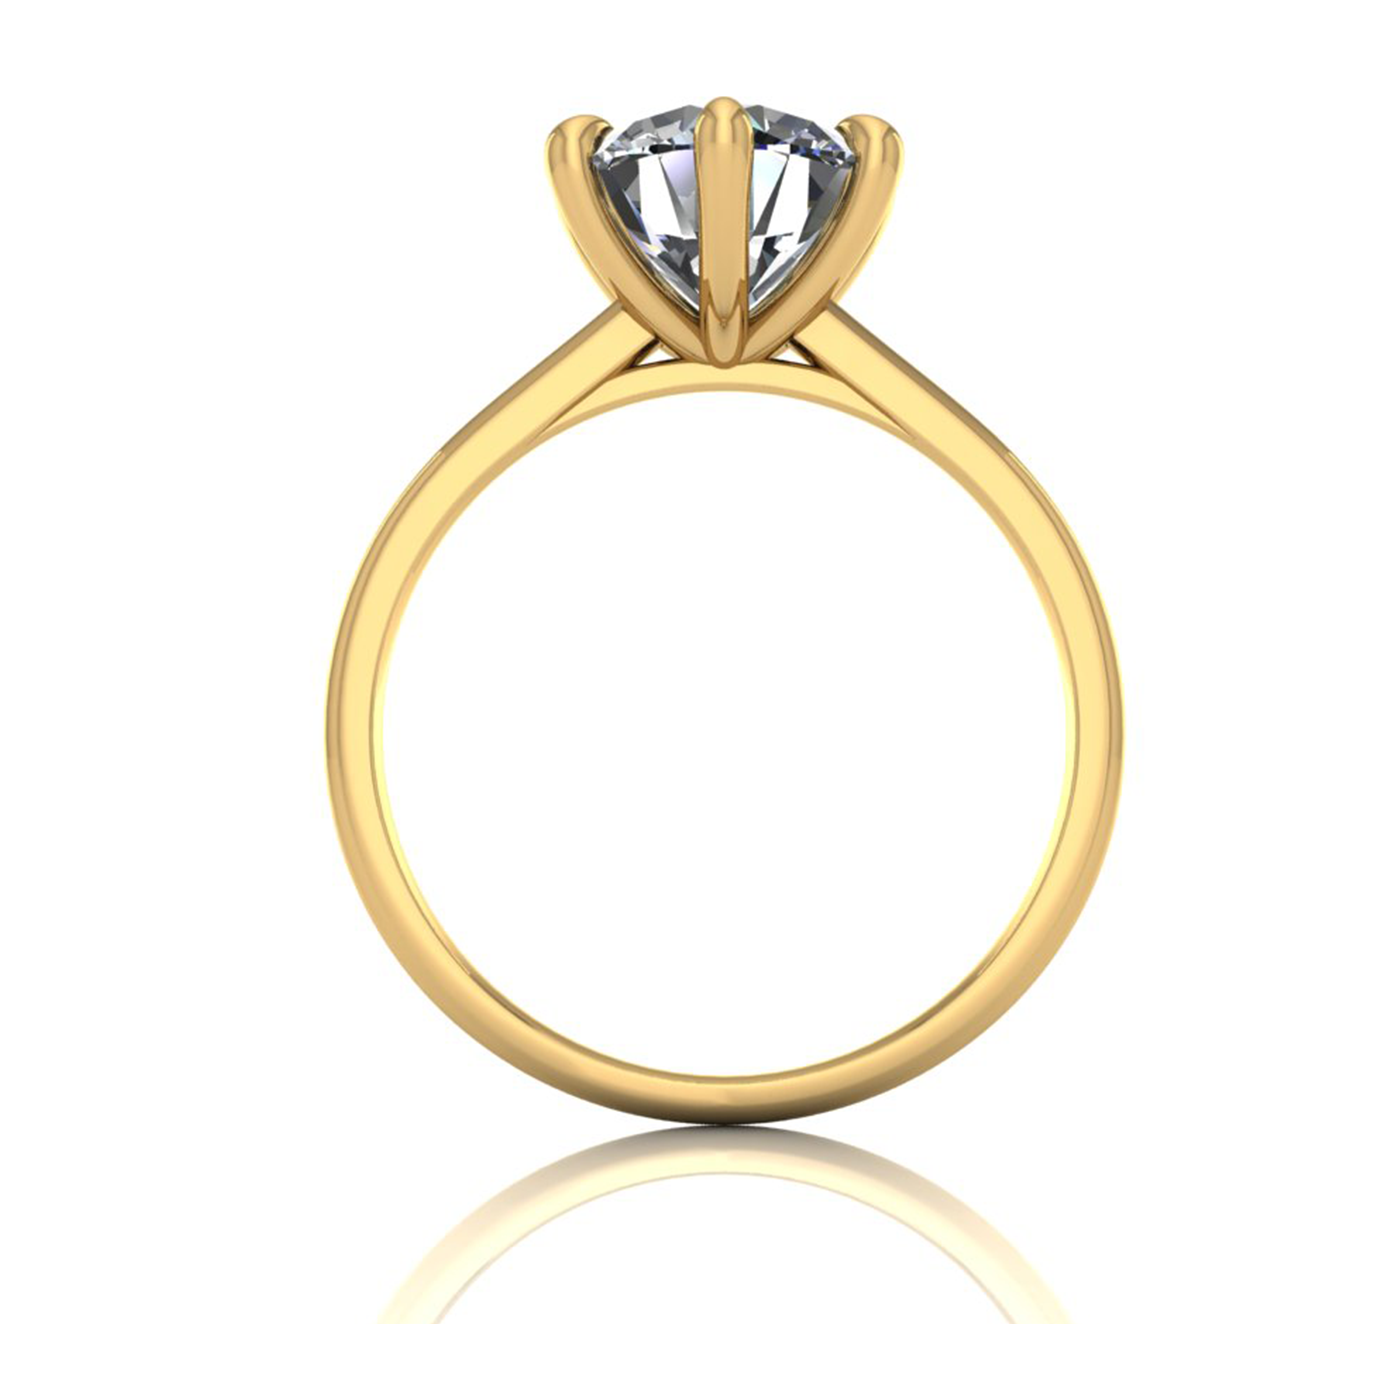 18k yellow gold 2,00 ct 6 prongs solitaire round cut diamond engagement ring with whisper thin band